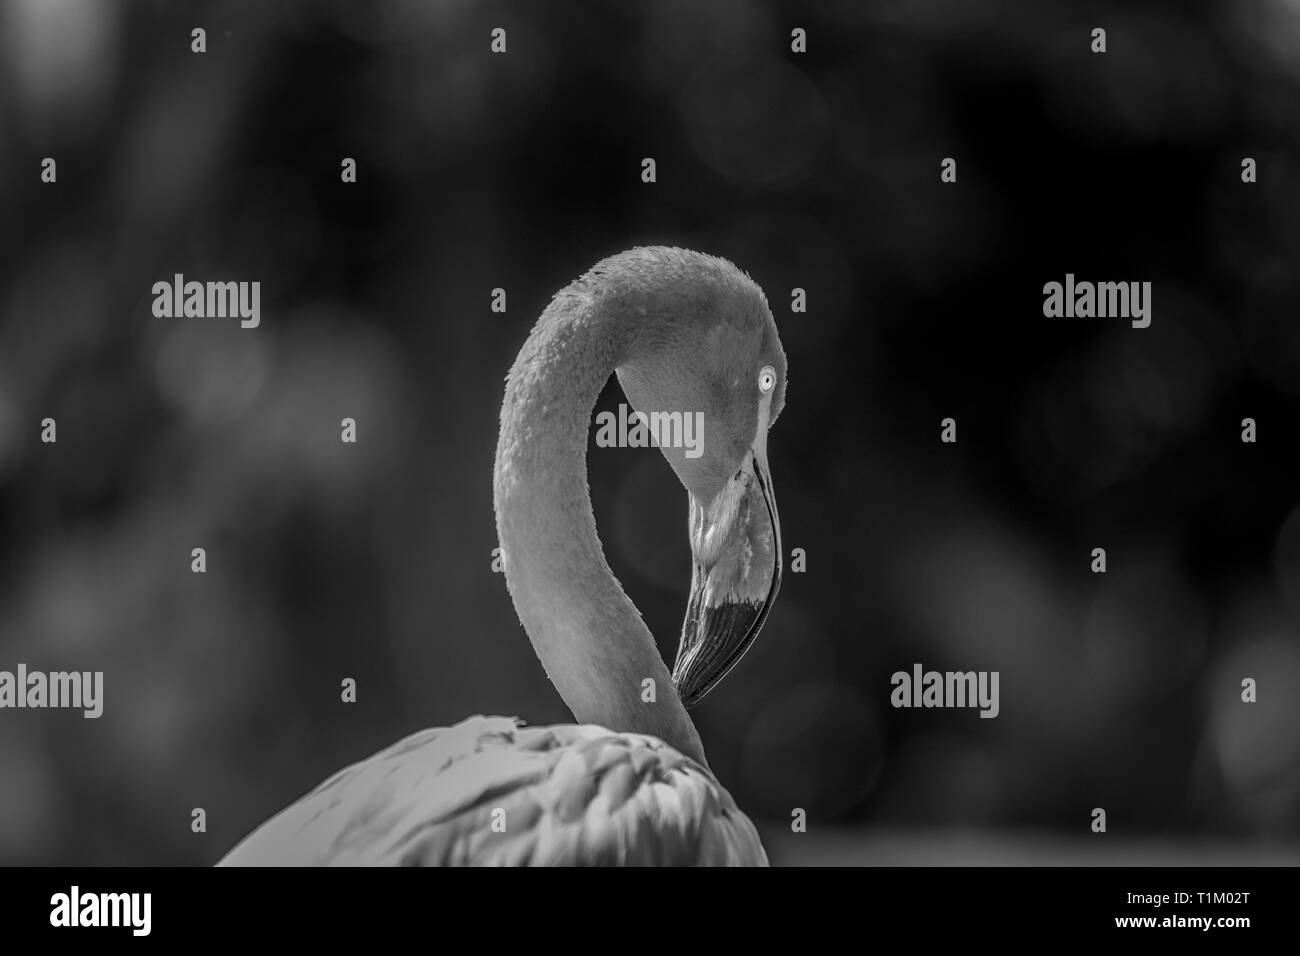 American flamingo close up in the forest in black and white. Stock Photo